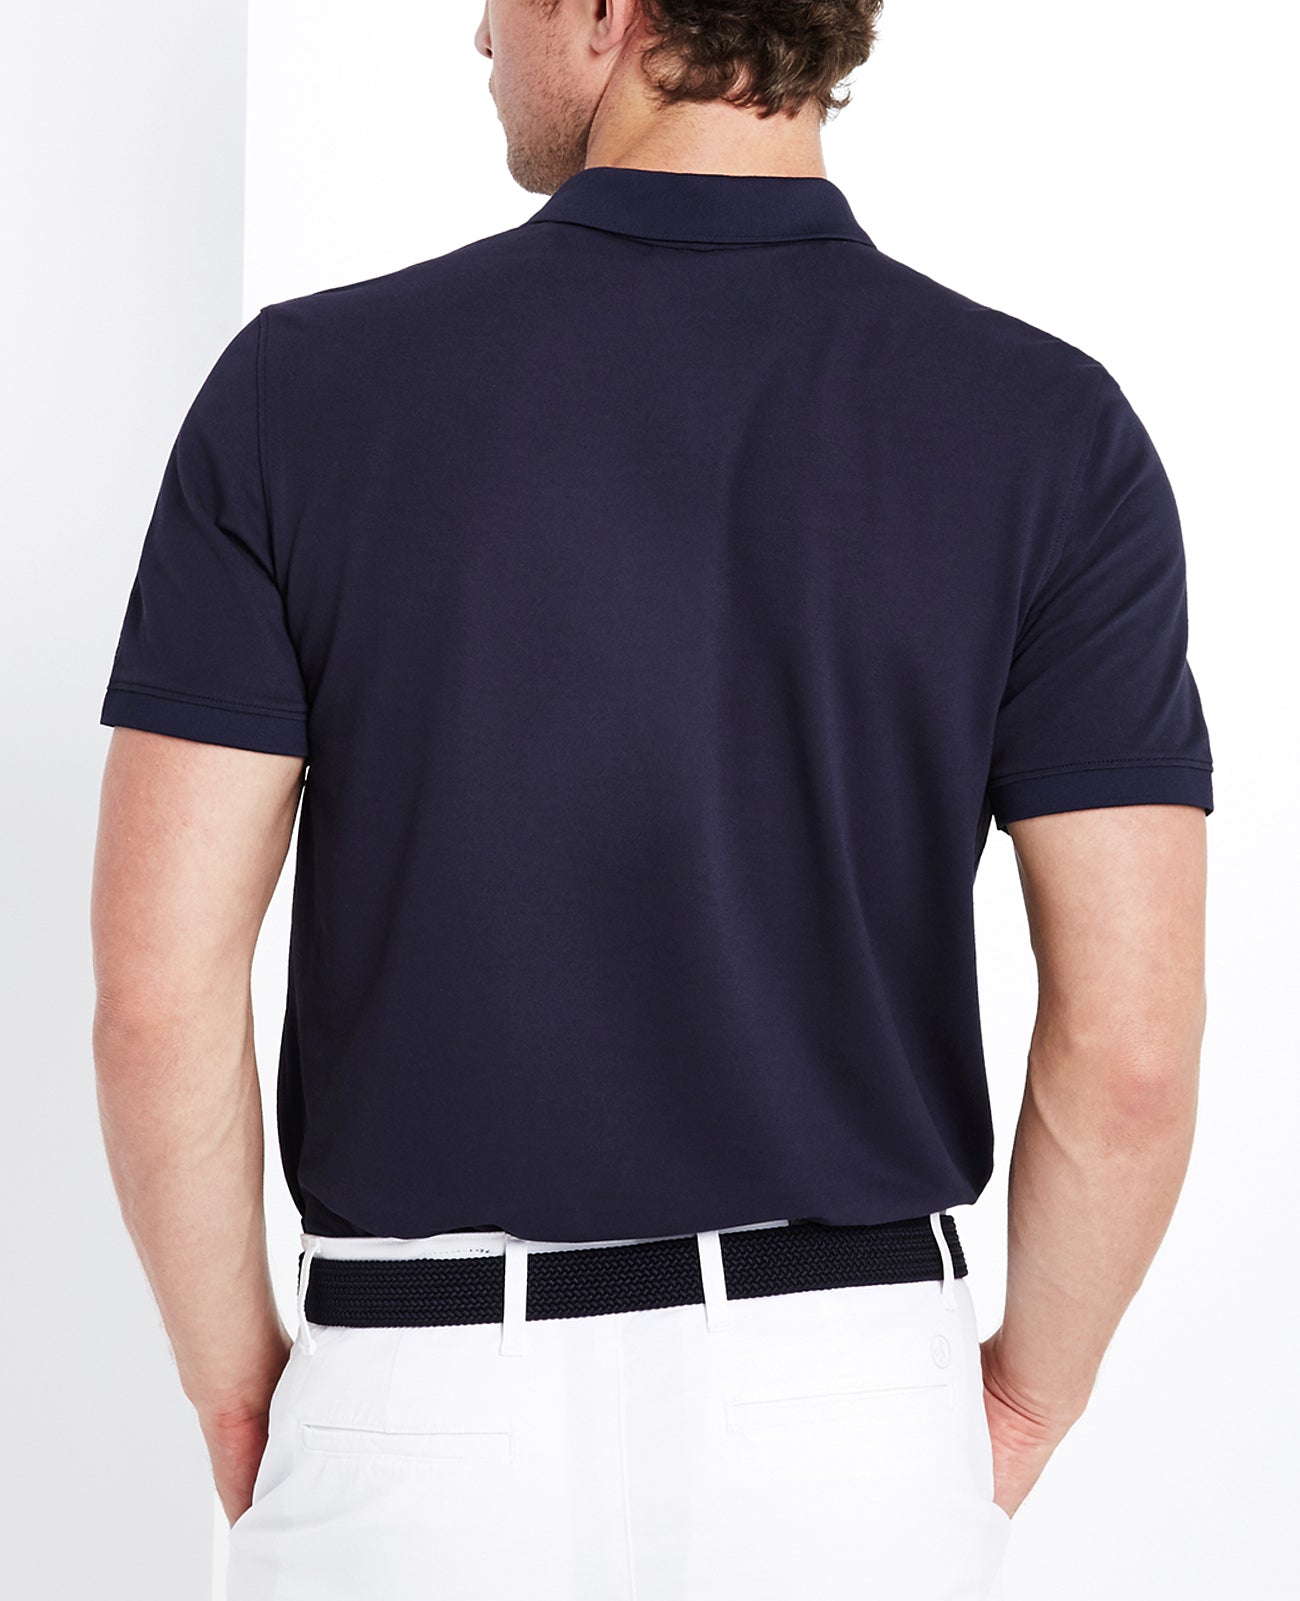 Berrian Polo Naval Blue Green Label Collection Men Tops Photo 3